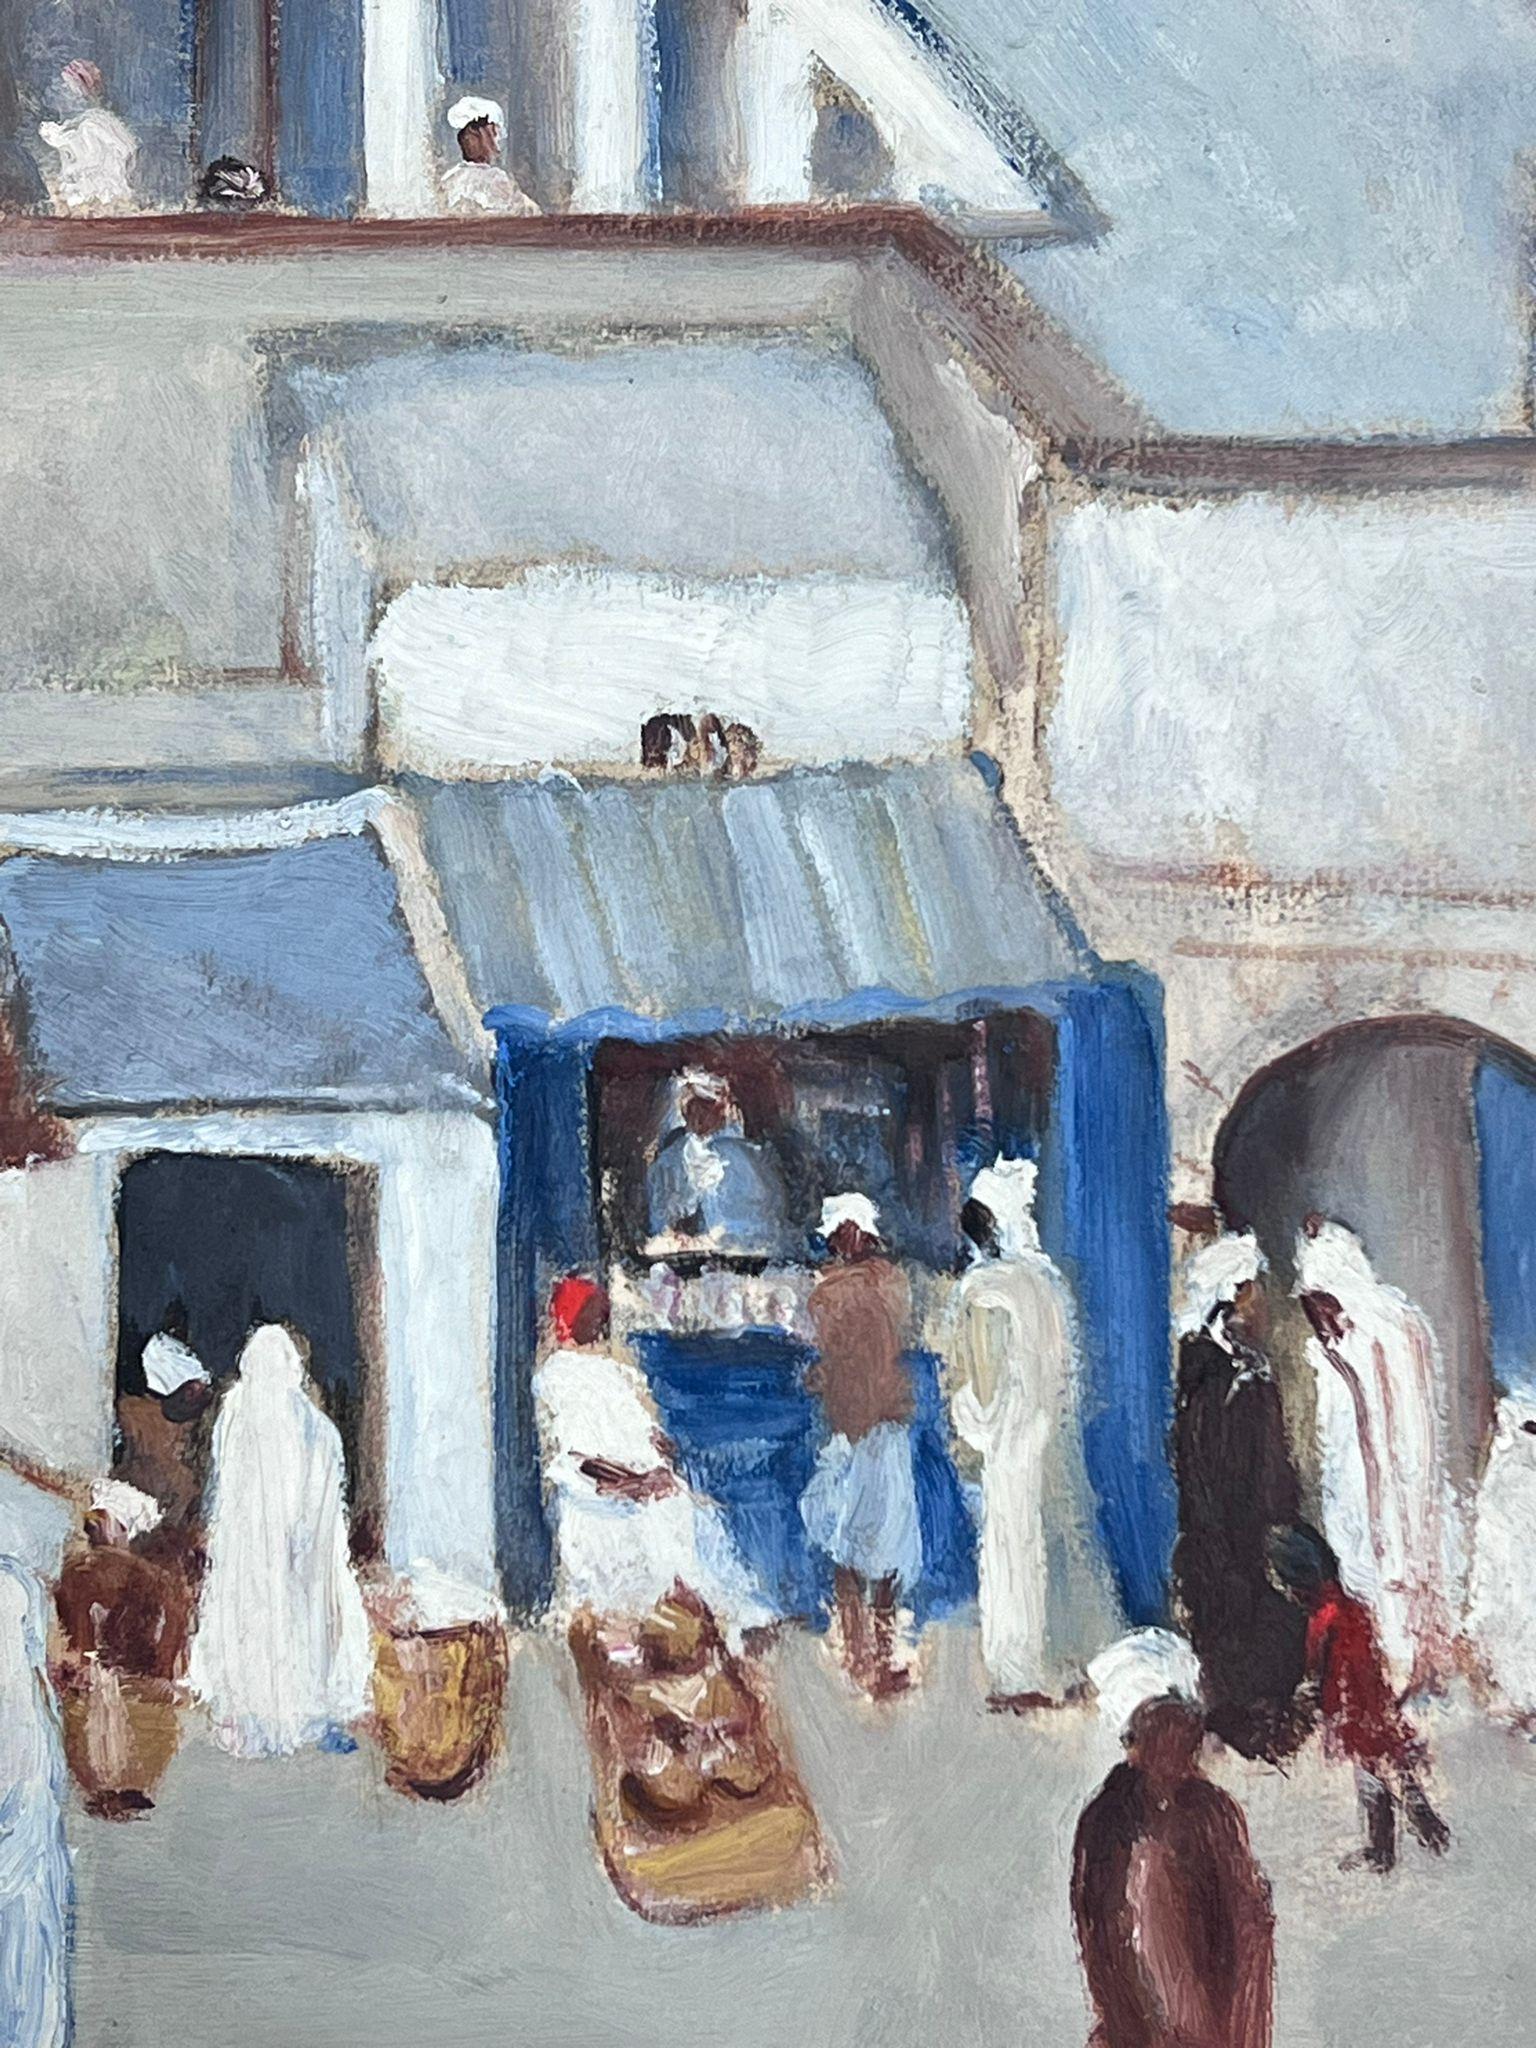 Busy Market
signed by Louise Alix (French, 1888-1980) *see notes below
provenance stamp to the back 
oil painting on artist paper, unframed
measures: 12 high by 14.5 inches wide
condition: overall very good and sound, a few scuffs and marks to the